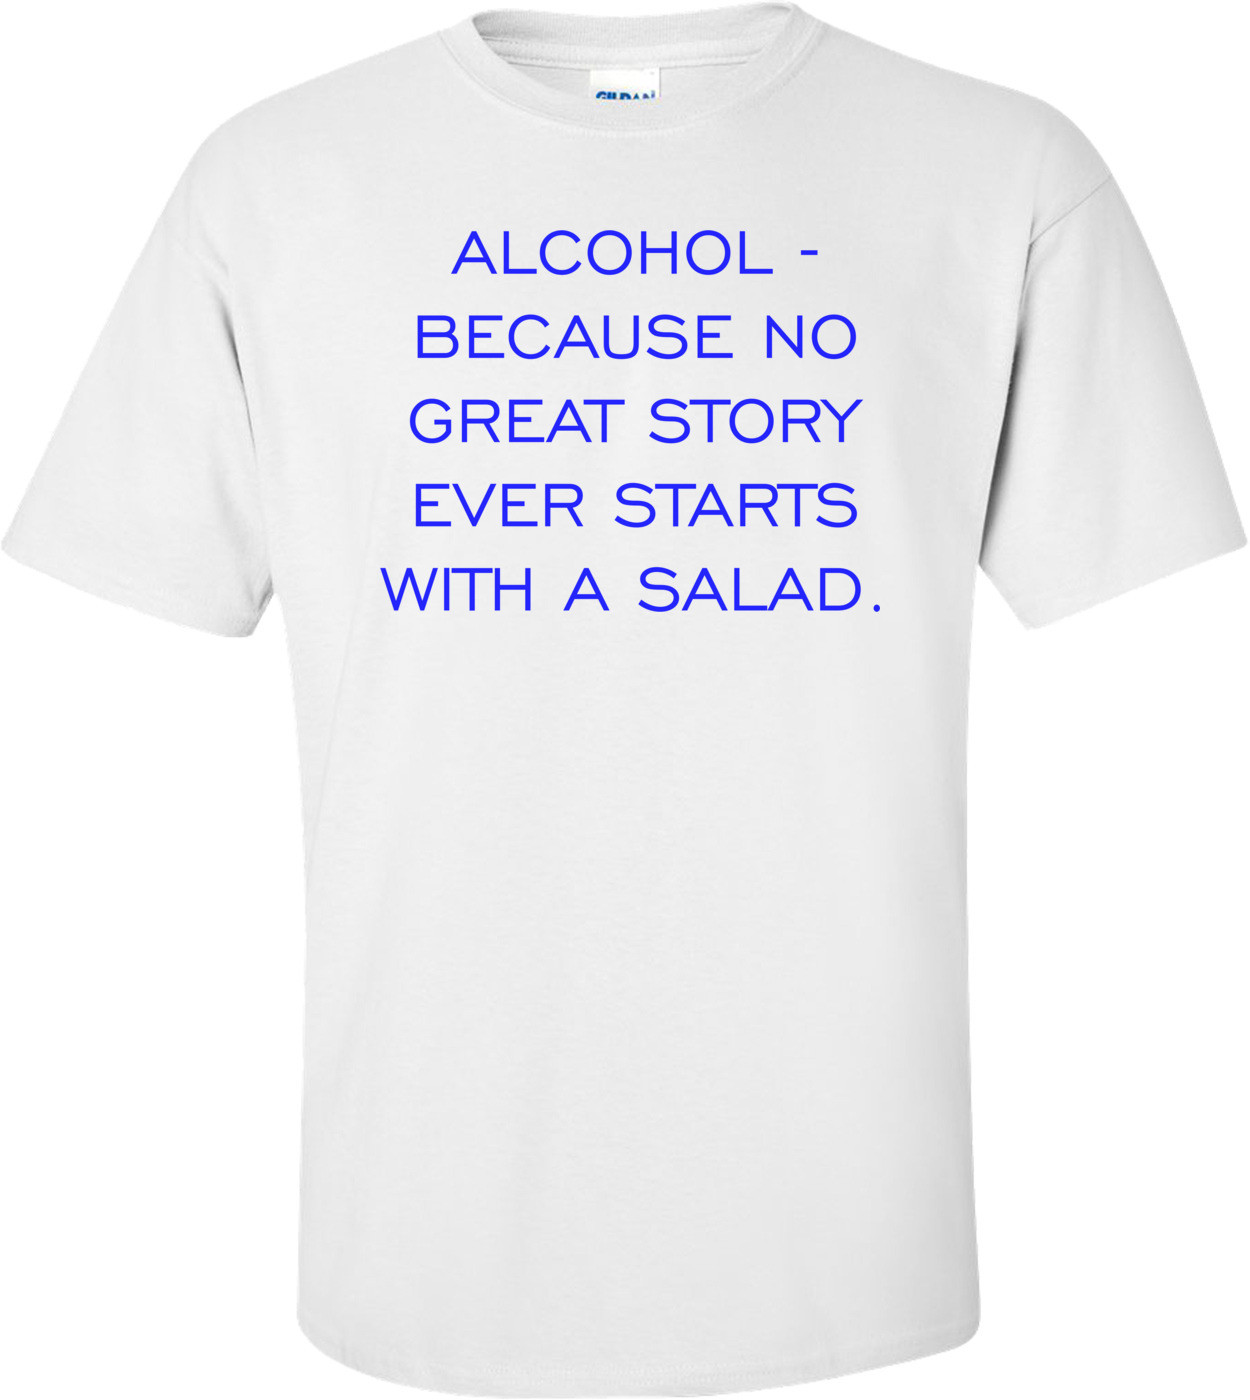 ALCOHOL - BECAUSE NO GREAT STORY EVER STARTS WITH A SALAD. Shirt